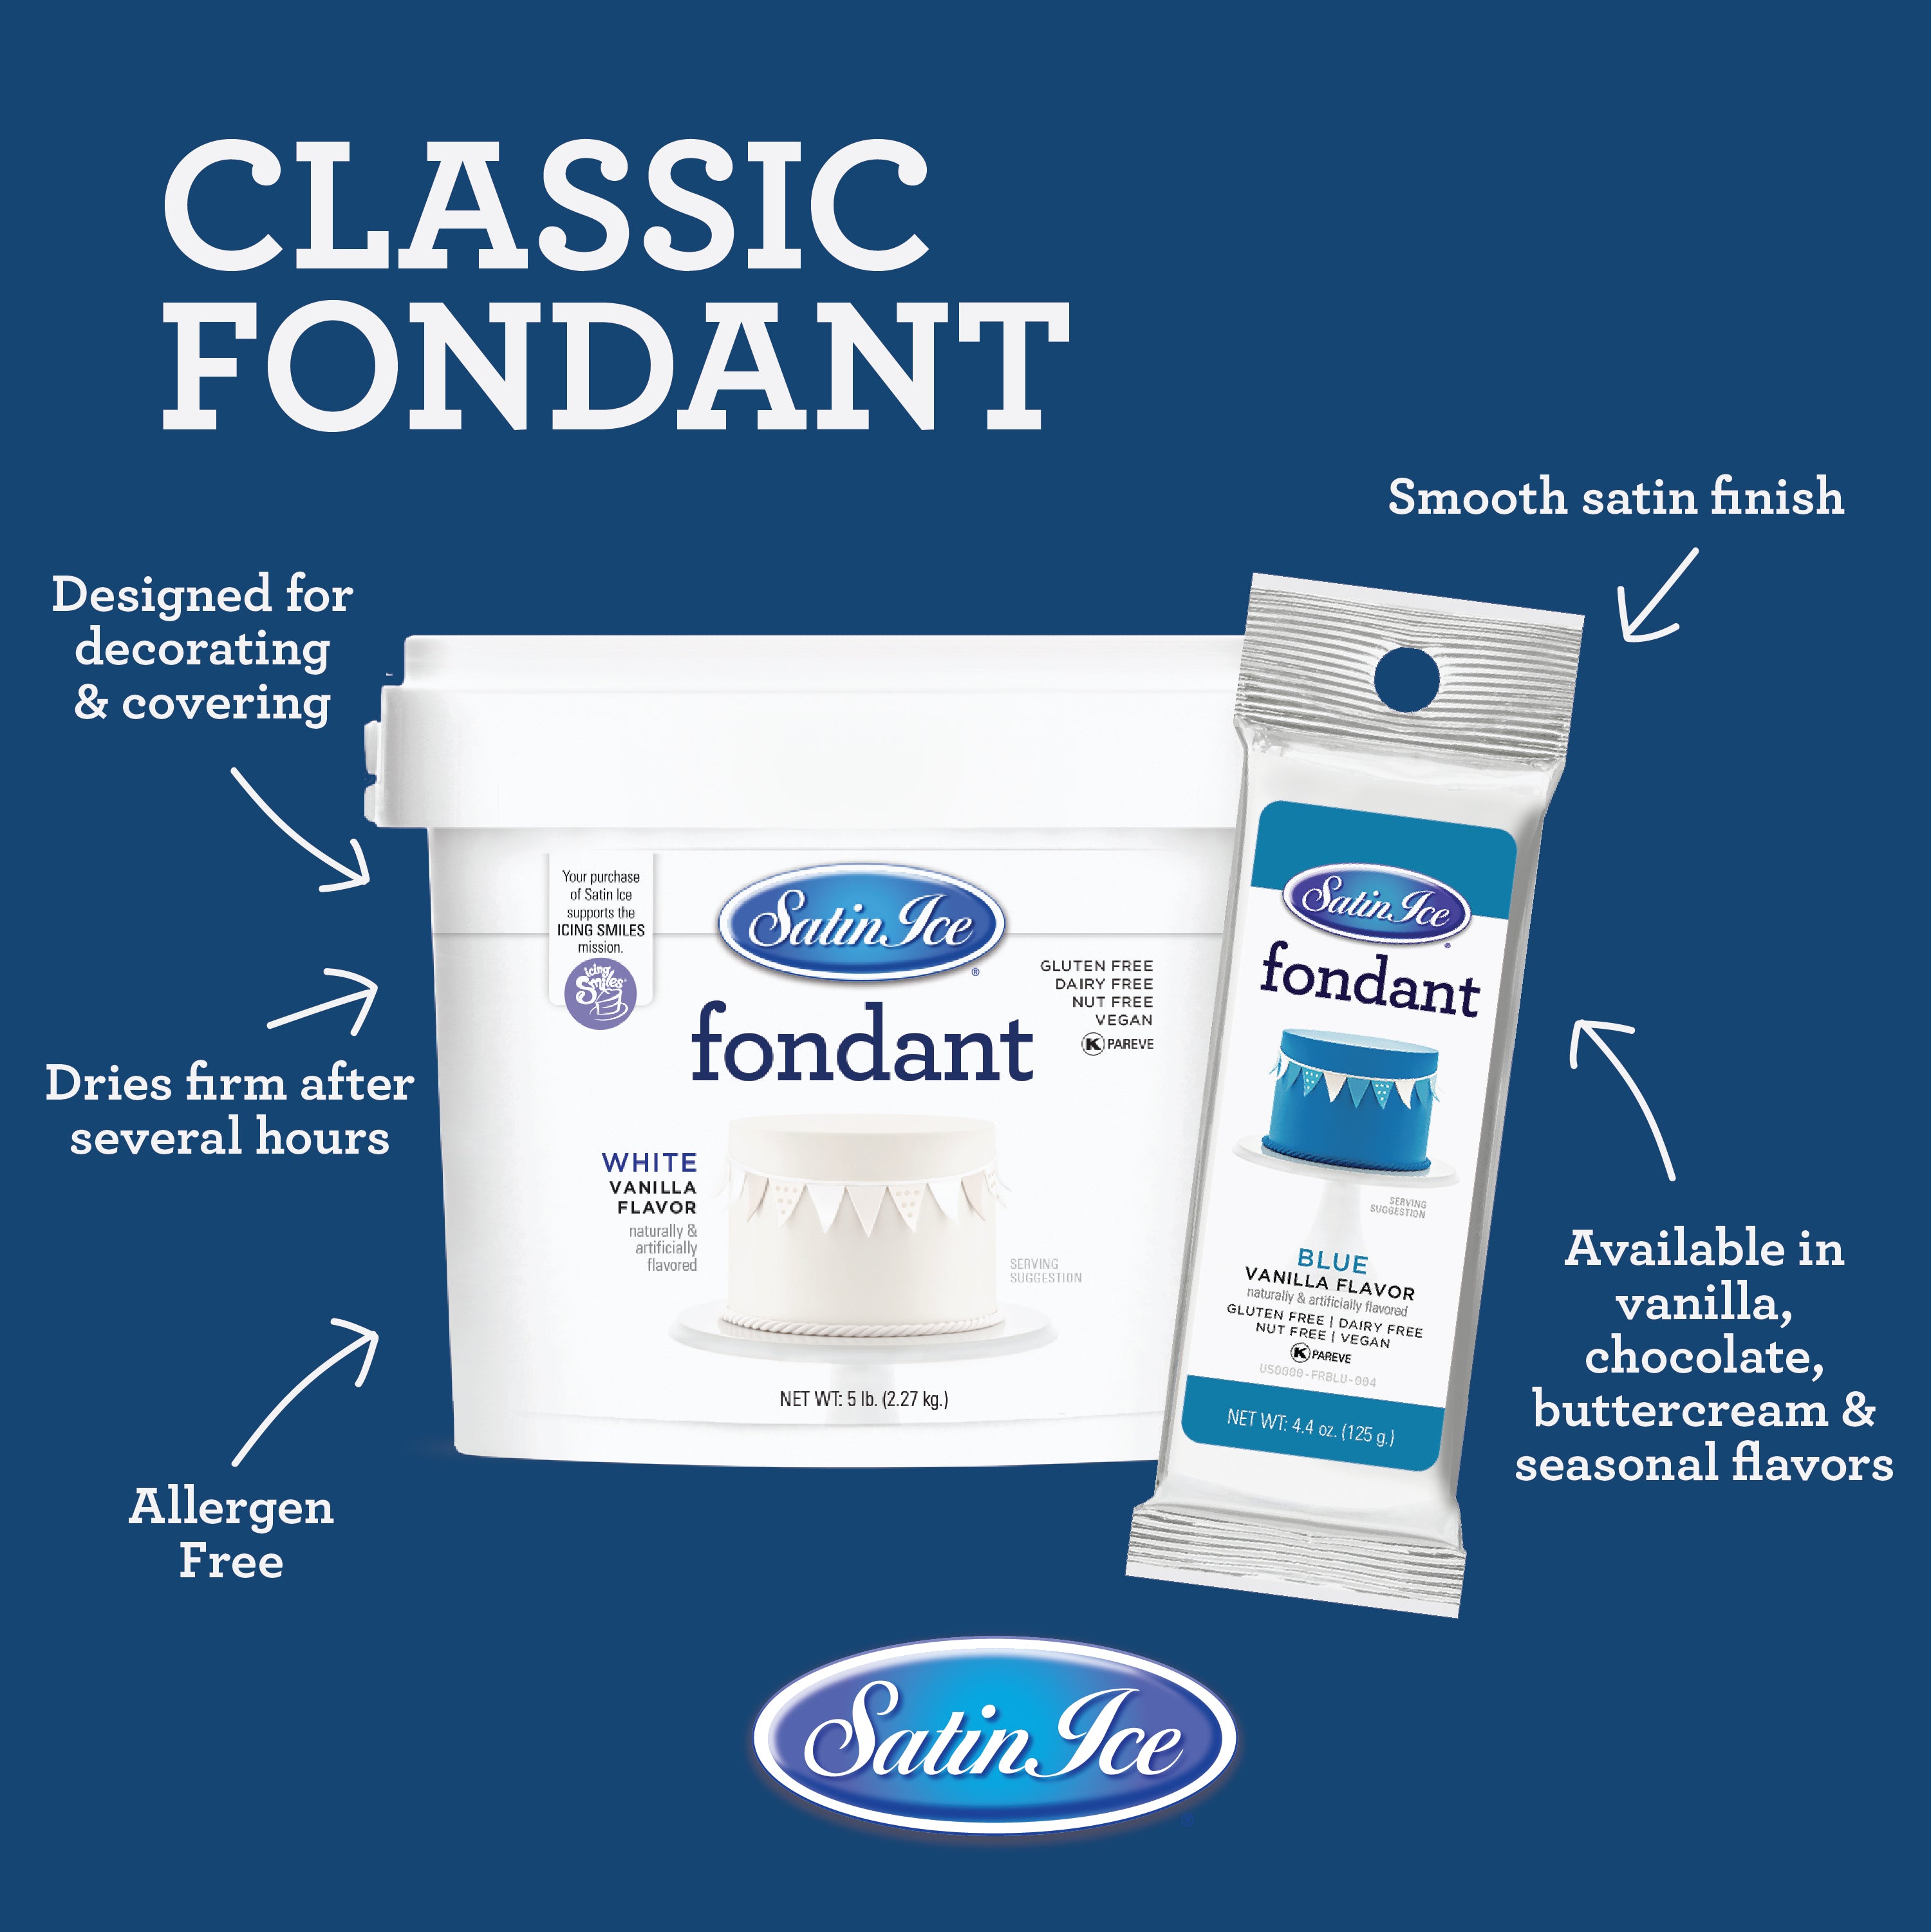 Satin Ice Fondant All You Need To Know!